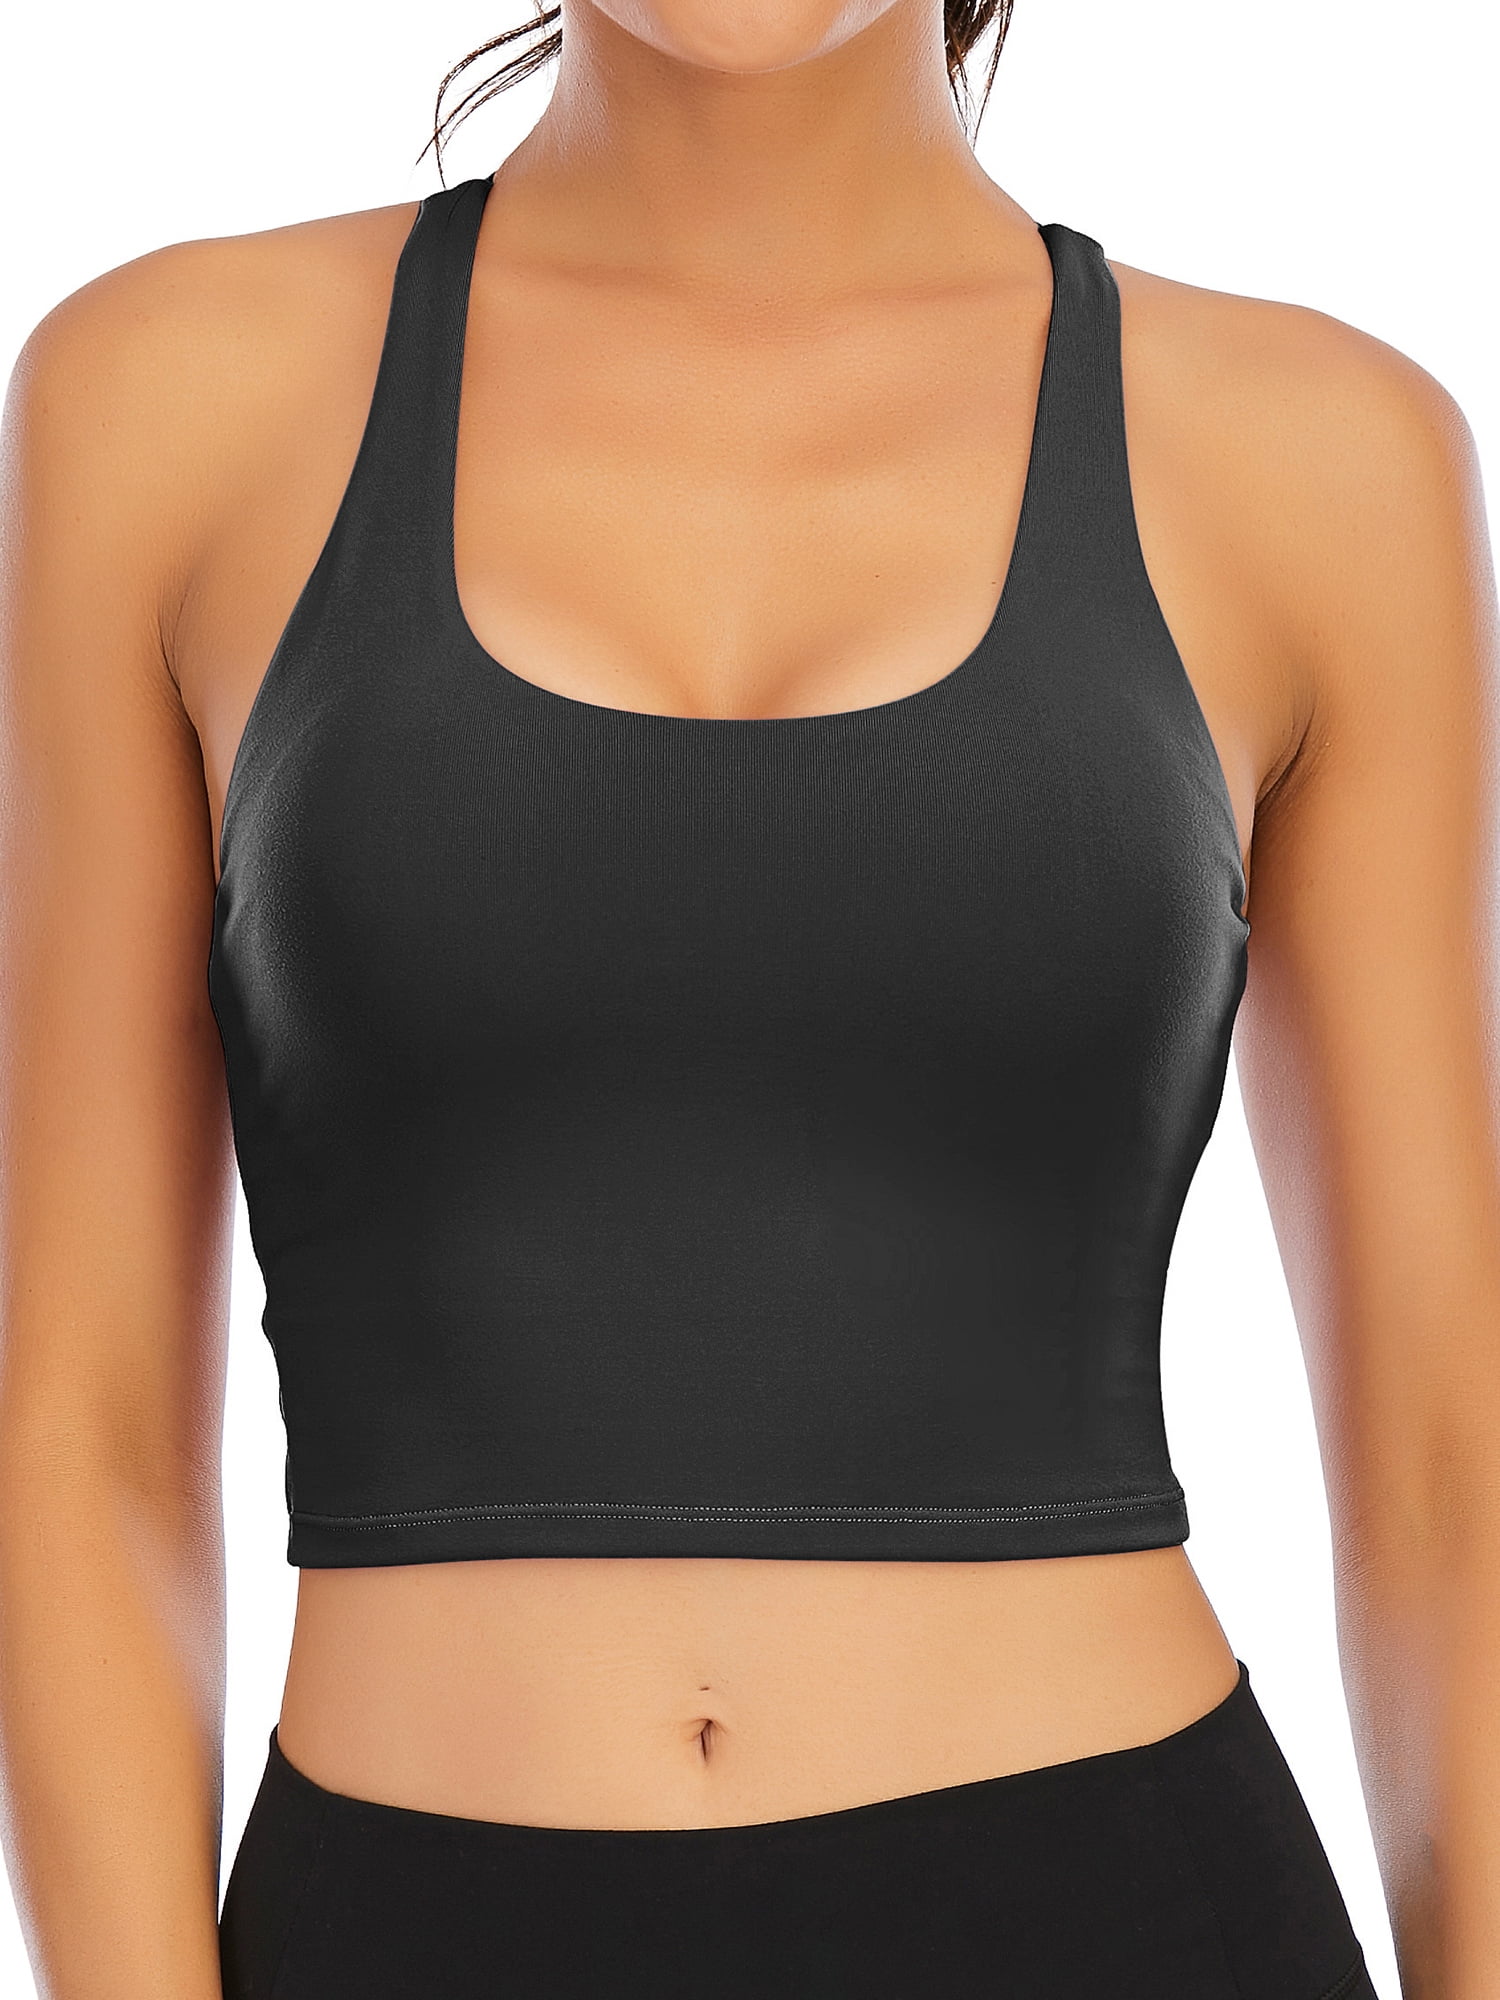 Details about   ️Plus Size Womens Padded Sports Bra Gym Vest Support Cropped Tops Stretch Bras 